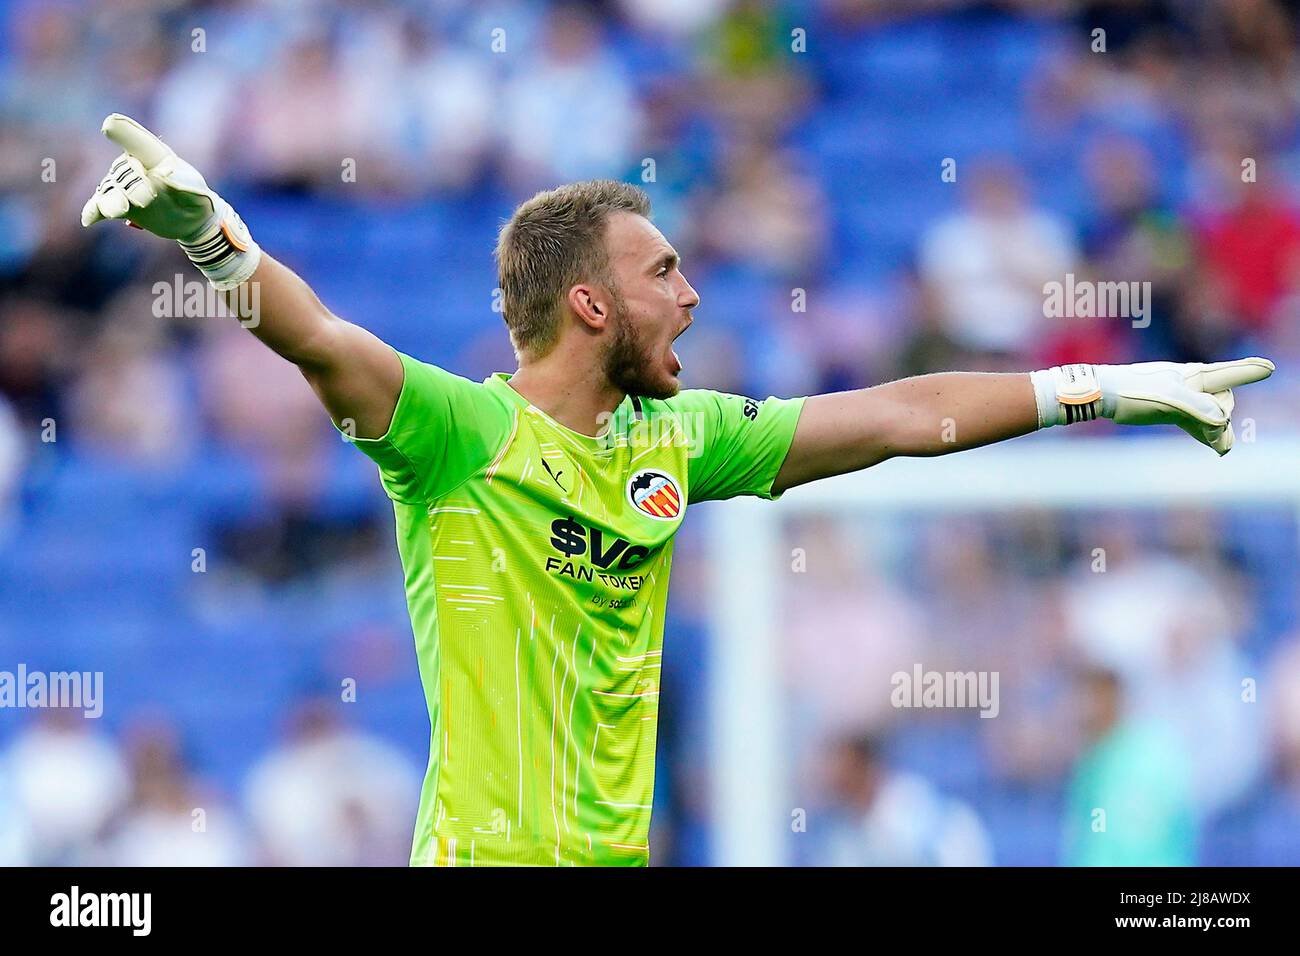 Jasper Cillessen of Valencia CF during the La Liga match between RCD Espanyol and Valencia CF played at RCDE Stadium on May 14, 2022 in Barcelona, Spain. (Photo by PRESSINPHOTO) Stock Photo